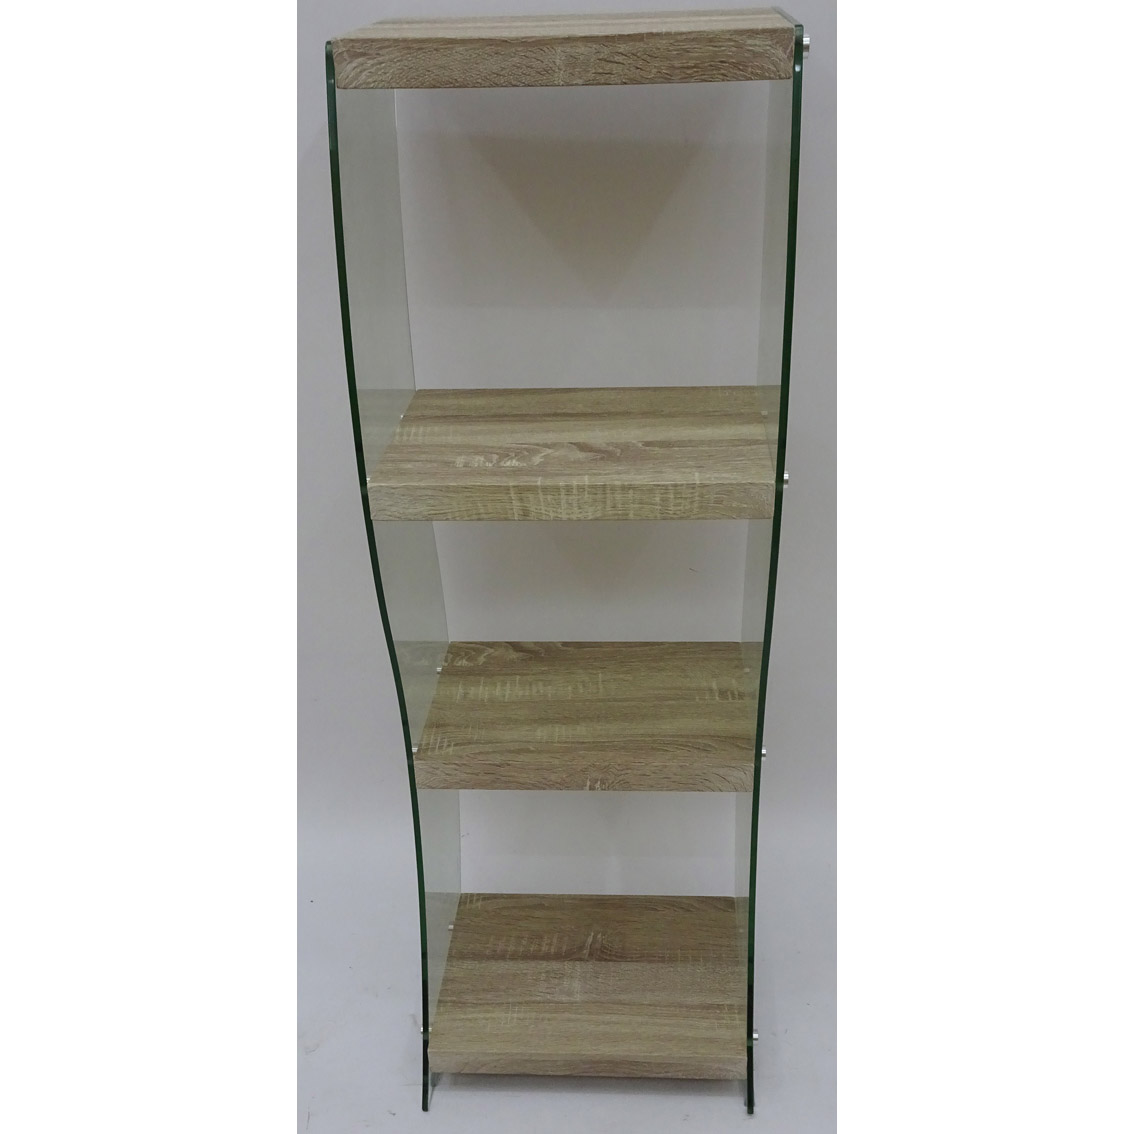 Contemporary curved glass book shelf with wood veneer tiers